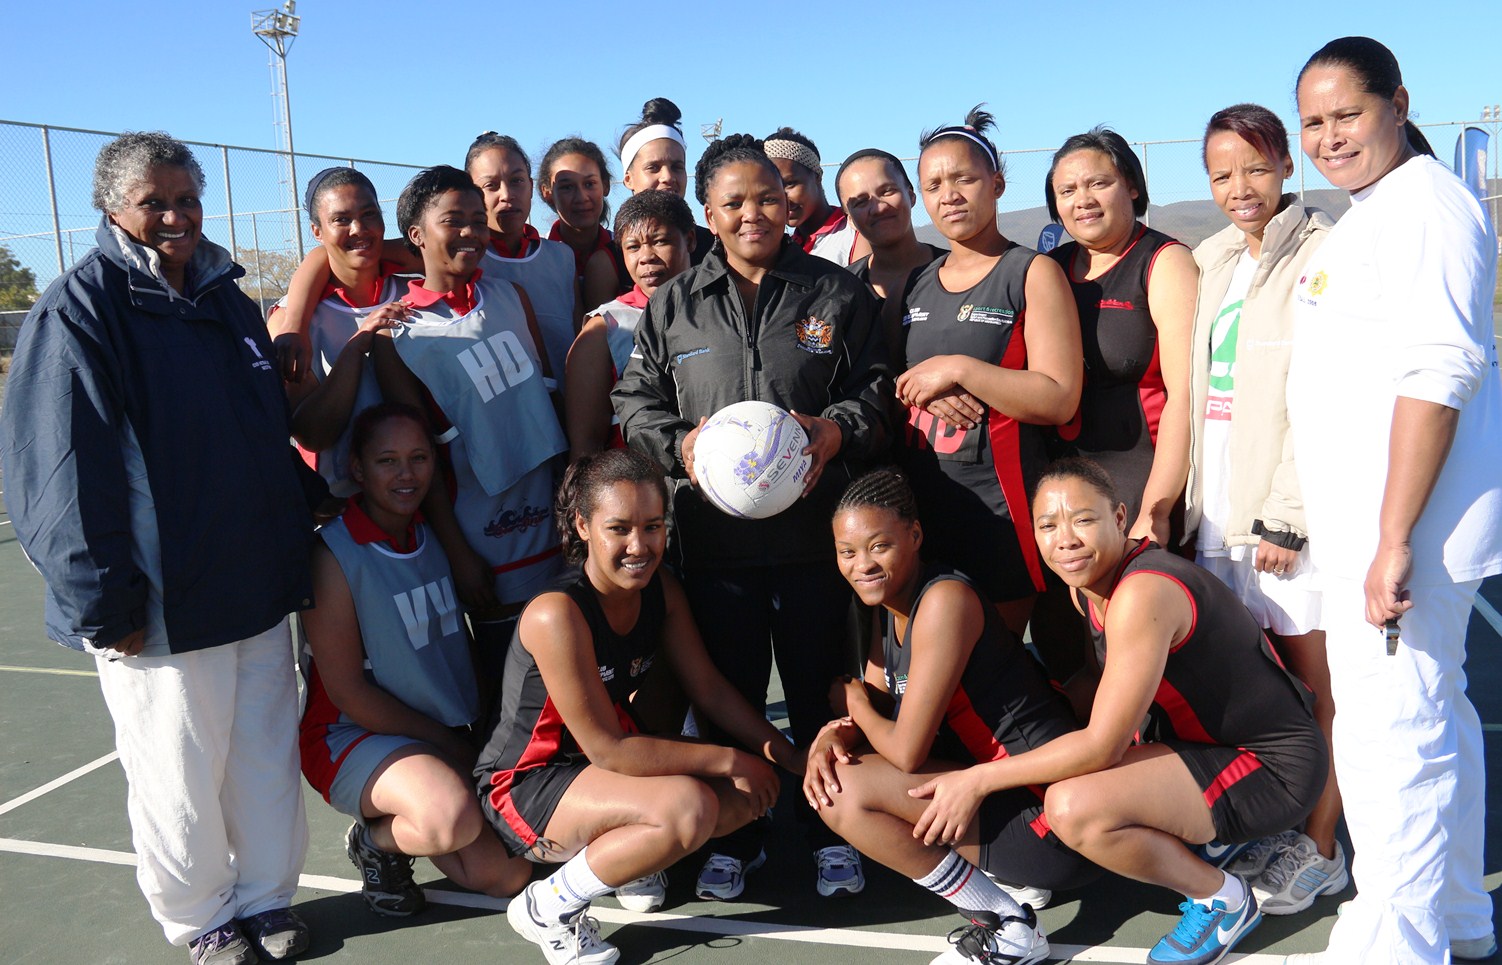 Minister Mbombo with netball players and representatives at the Oudtshoorn Sport Festival.